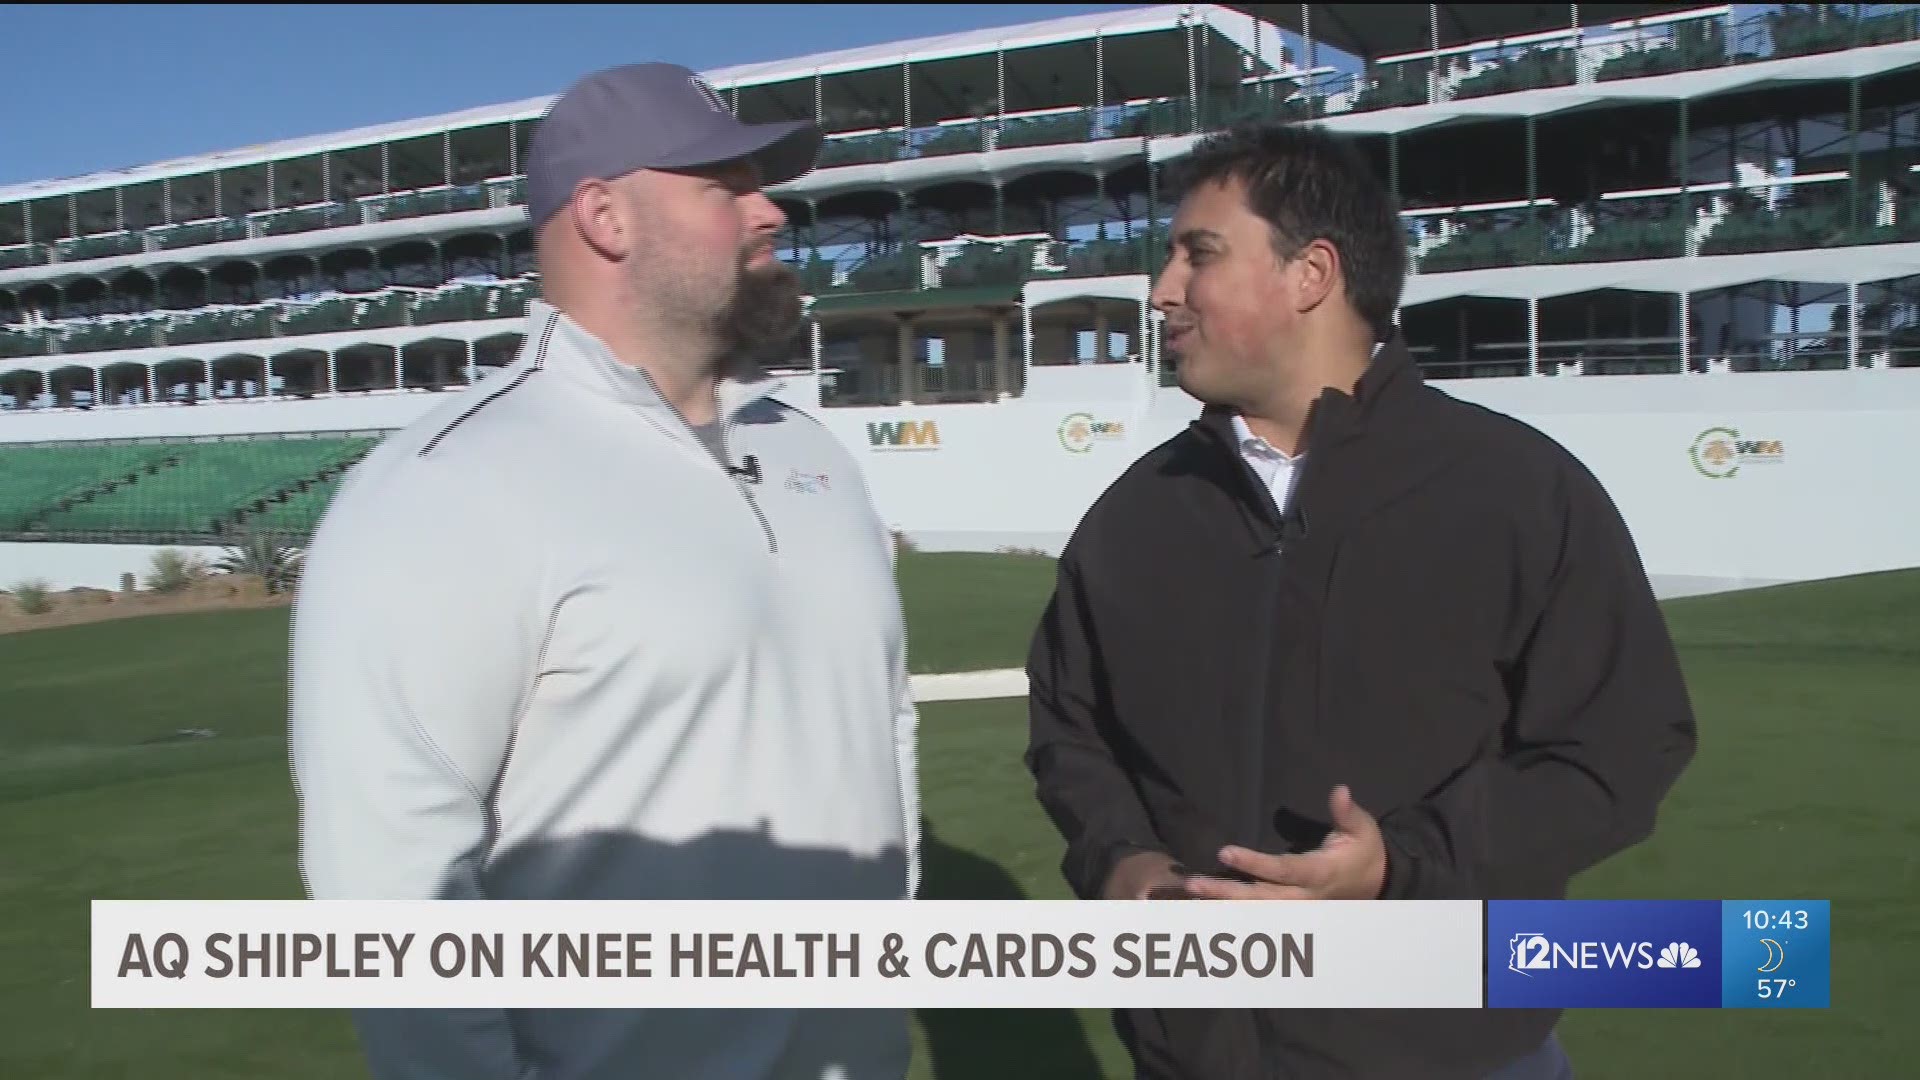 Cardinals center A.Q. Shipley talks about his knee health, the Cardinals season and the team's hire of head coach Kliff Kingsbury.